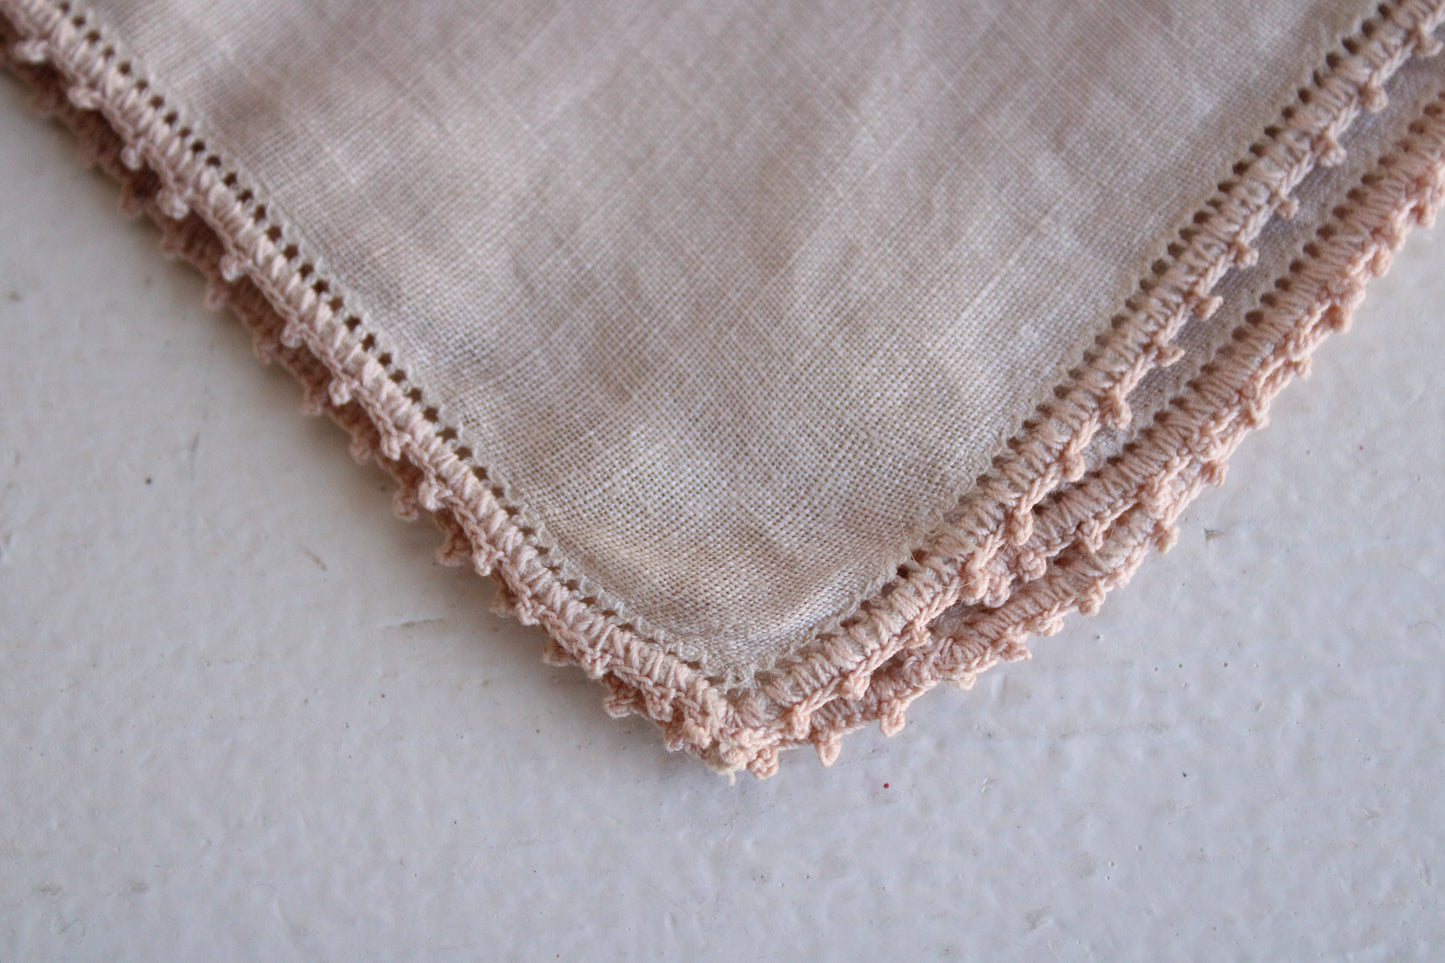 "Dried Rose" Hand Plant Dyed Vintage Handkerchief in Mottled Dusty Pink